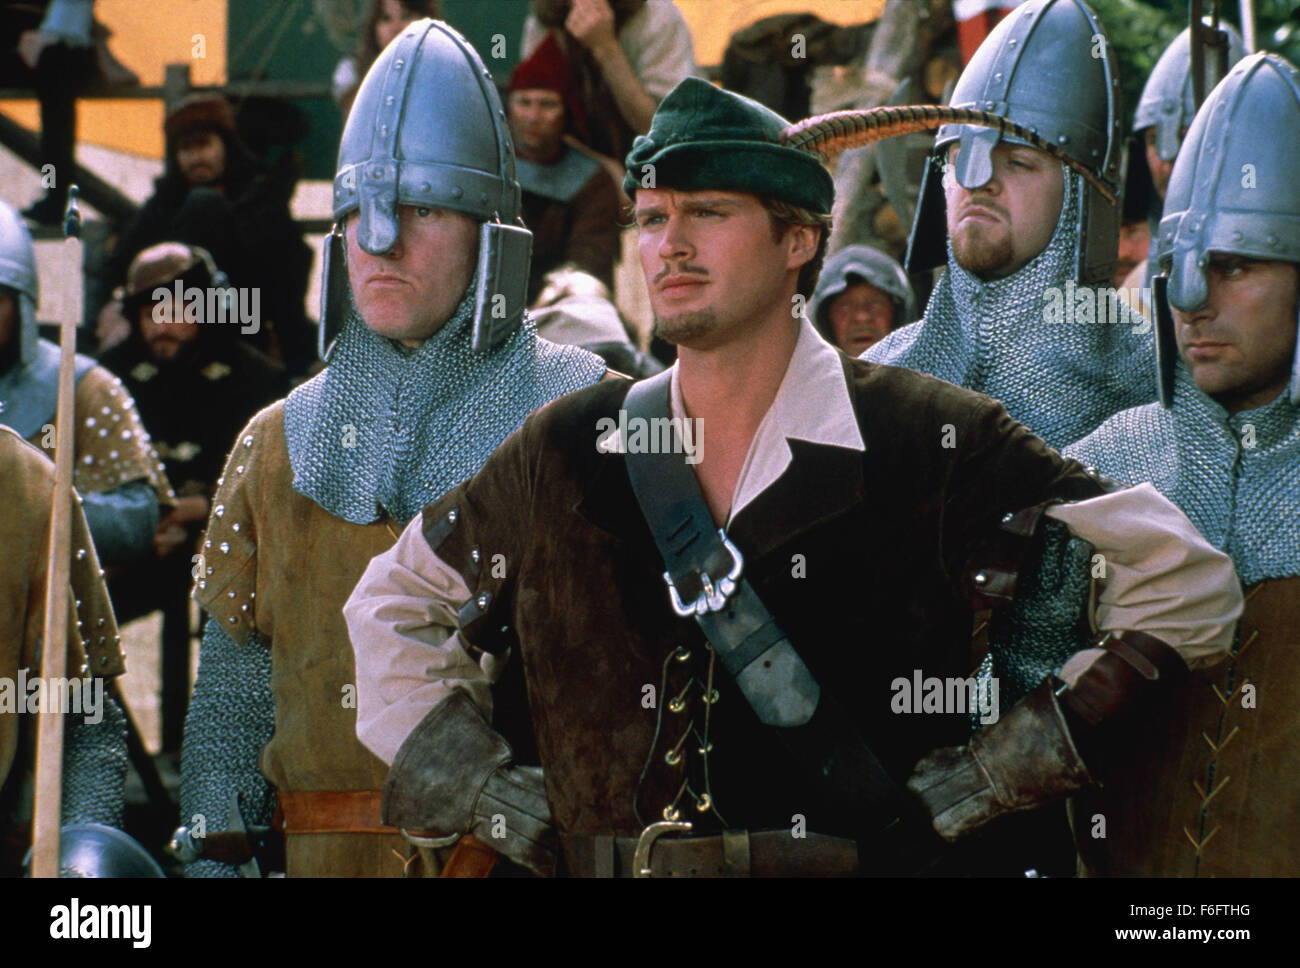 RELEASE DATE: July 28, 1993. MOVIE TITLE: Robin Hood Men in Tights. STUDIO: Brooksfilms. PLOT: The standard story of Robin Hood: Evil Prince John is oppressing the people while good King Richard is away on the Crusades. Robin steals from the tax collectors, wins an archery contest, defeats the Sheriff, and rescues Maid Marian. In this version, however, Mel Brooks adds his own personal touch, parodying traditional adventure films, romance films, and the whole idea of men running around the woods in tights. PICTURED: CARY ELWES as Robin Hood. Stock Photo